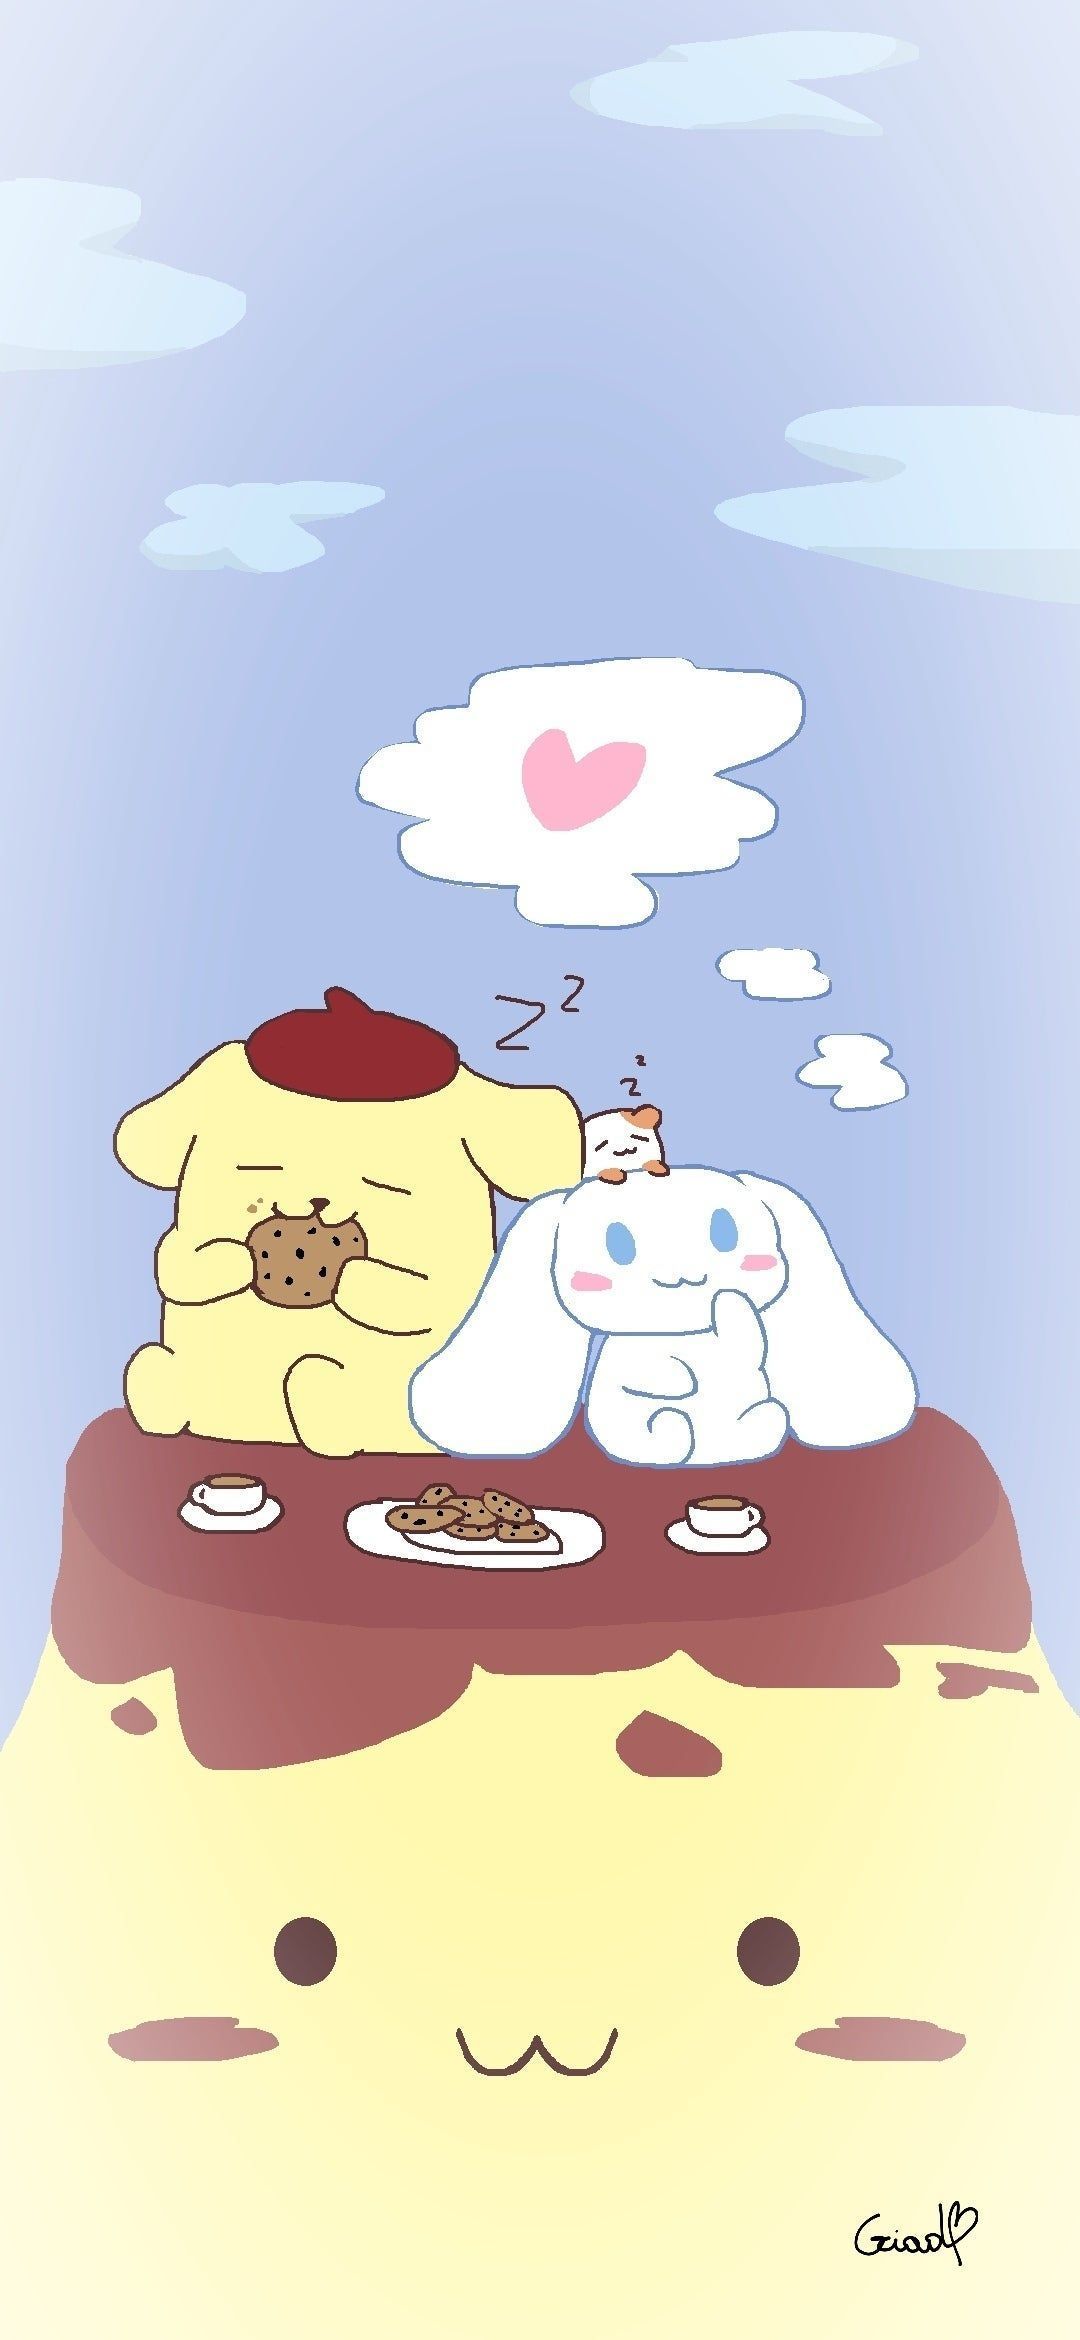 I made this Pompompurin and Cinnamoroll background for my phone, I tried to mix their two aesthetics but kind of failed imo. Thoughts?